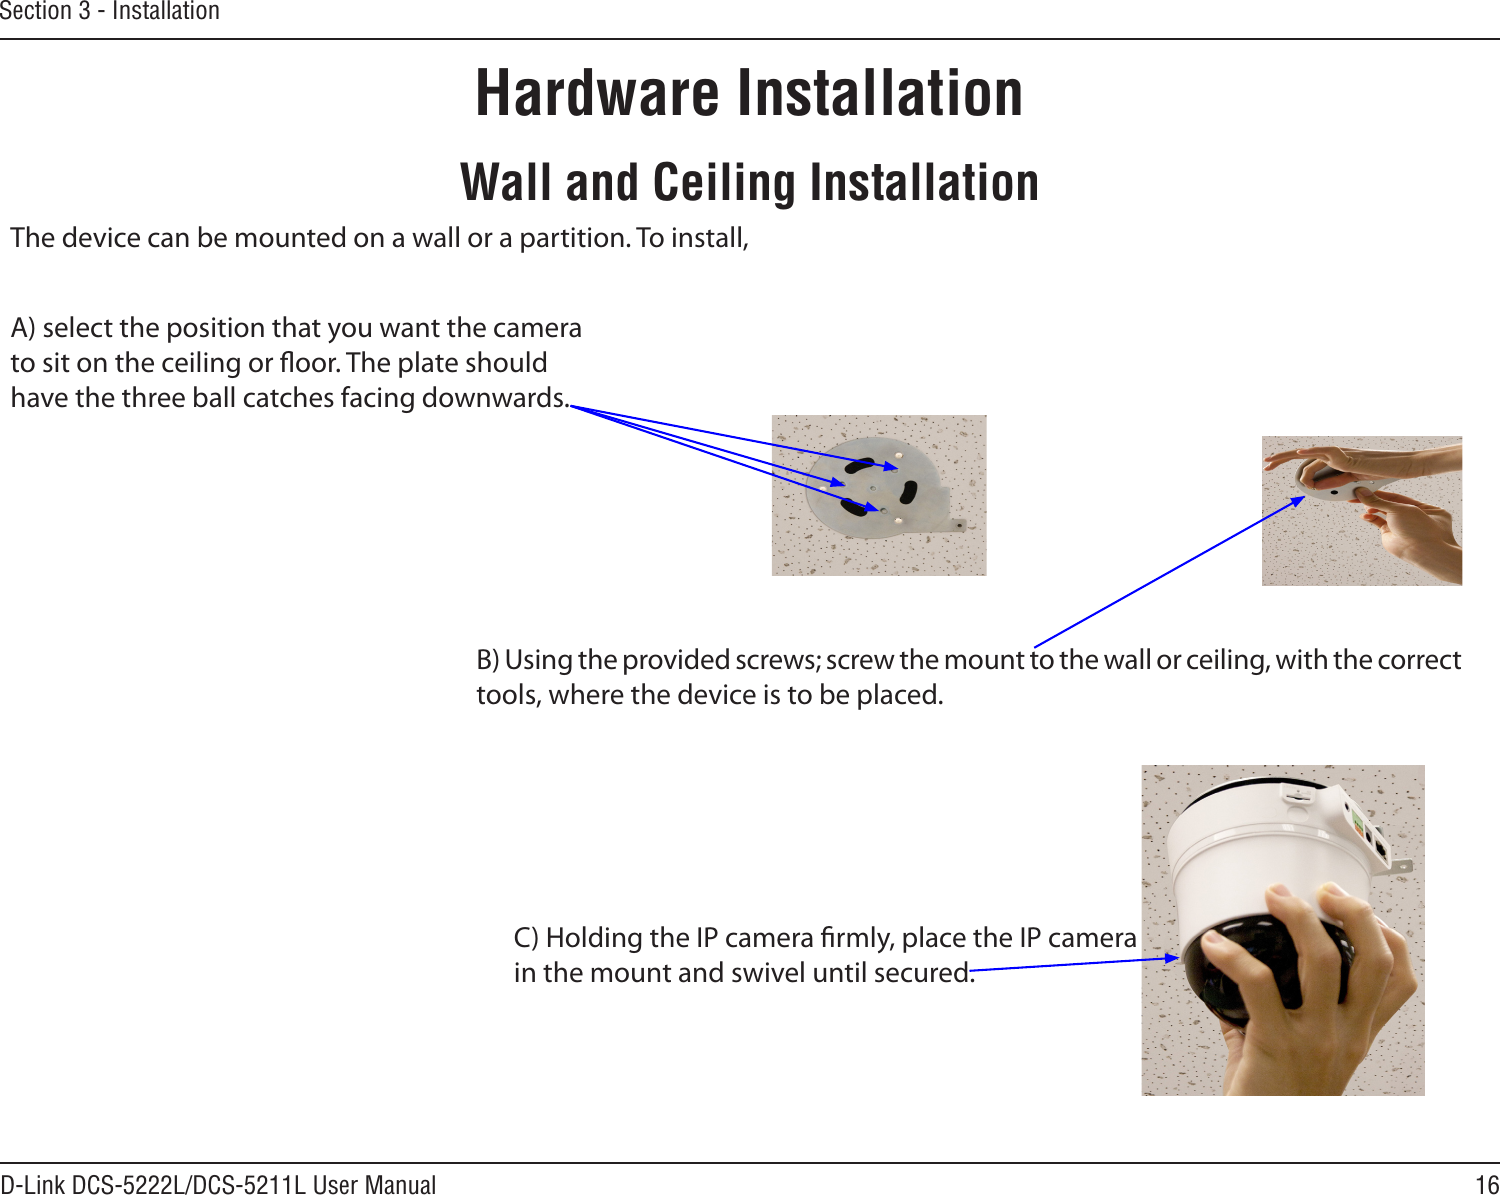 16D-Link DCS-5222L/DCS-5211L User ManualSection 3 - InstallationHardware InstallationWall and Ceiling InstallationC) Holding the IP camera rmly, place the IP camerain the mount and swivel until secured.  B) Using the provided screws; screw the mount to the wall or ceiling, with the correct tools, where the device is to be placed. The device can be mounted on a wall or a partition. To install,A) select the position that you want the camera to sit on the ceiling or oor. The plate should have the three ball catches facing downwards.